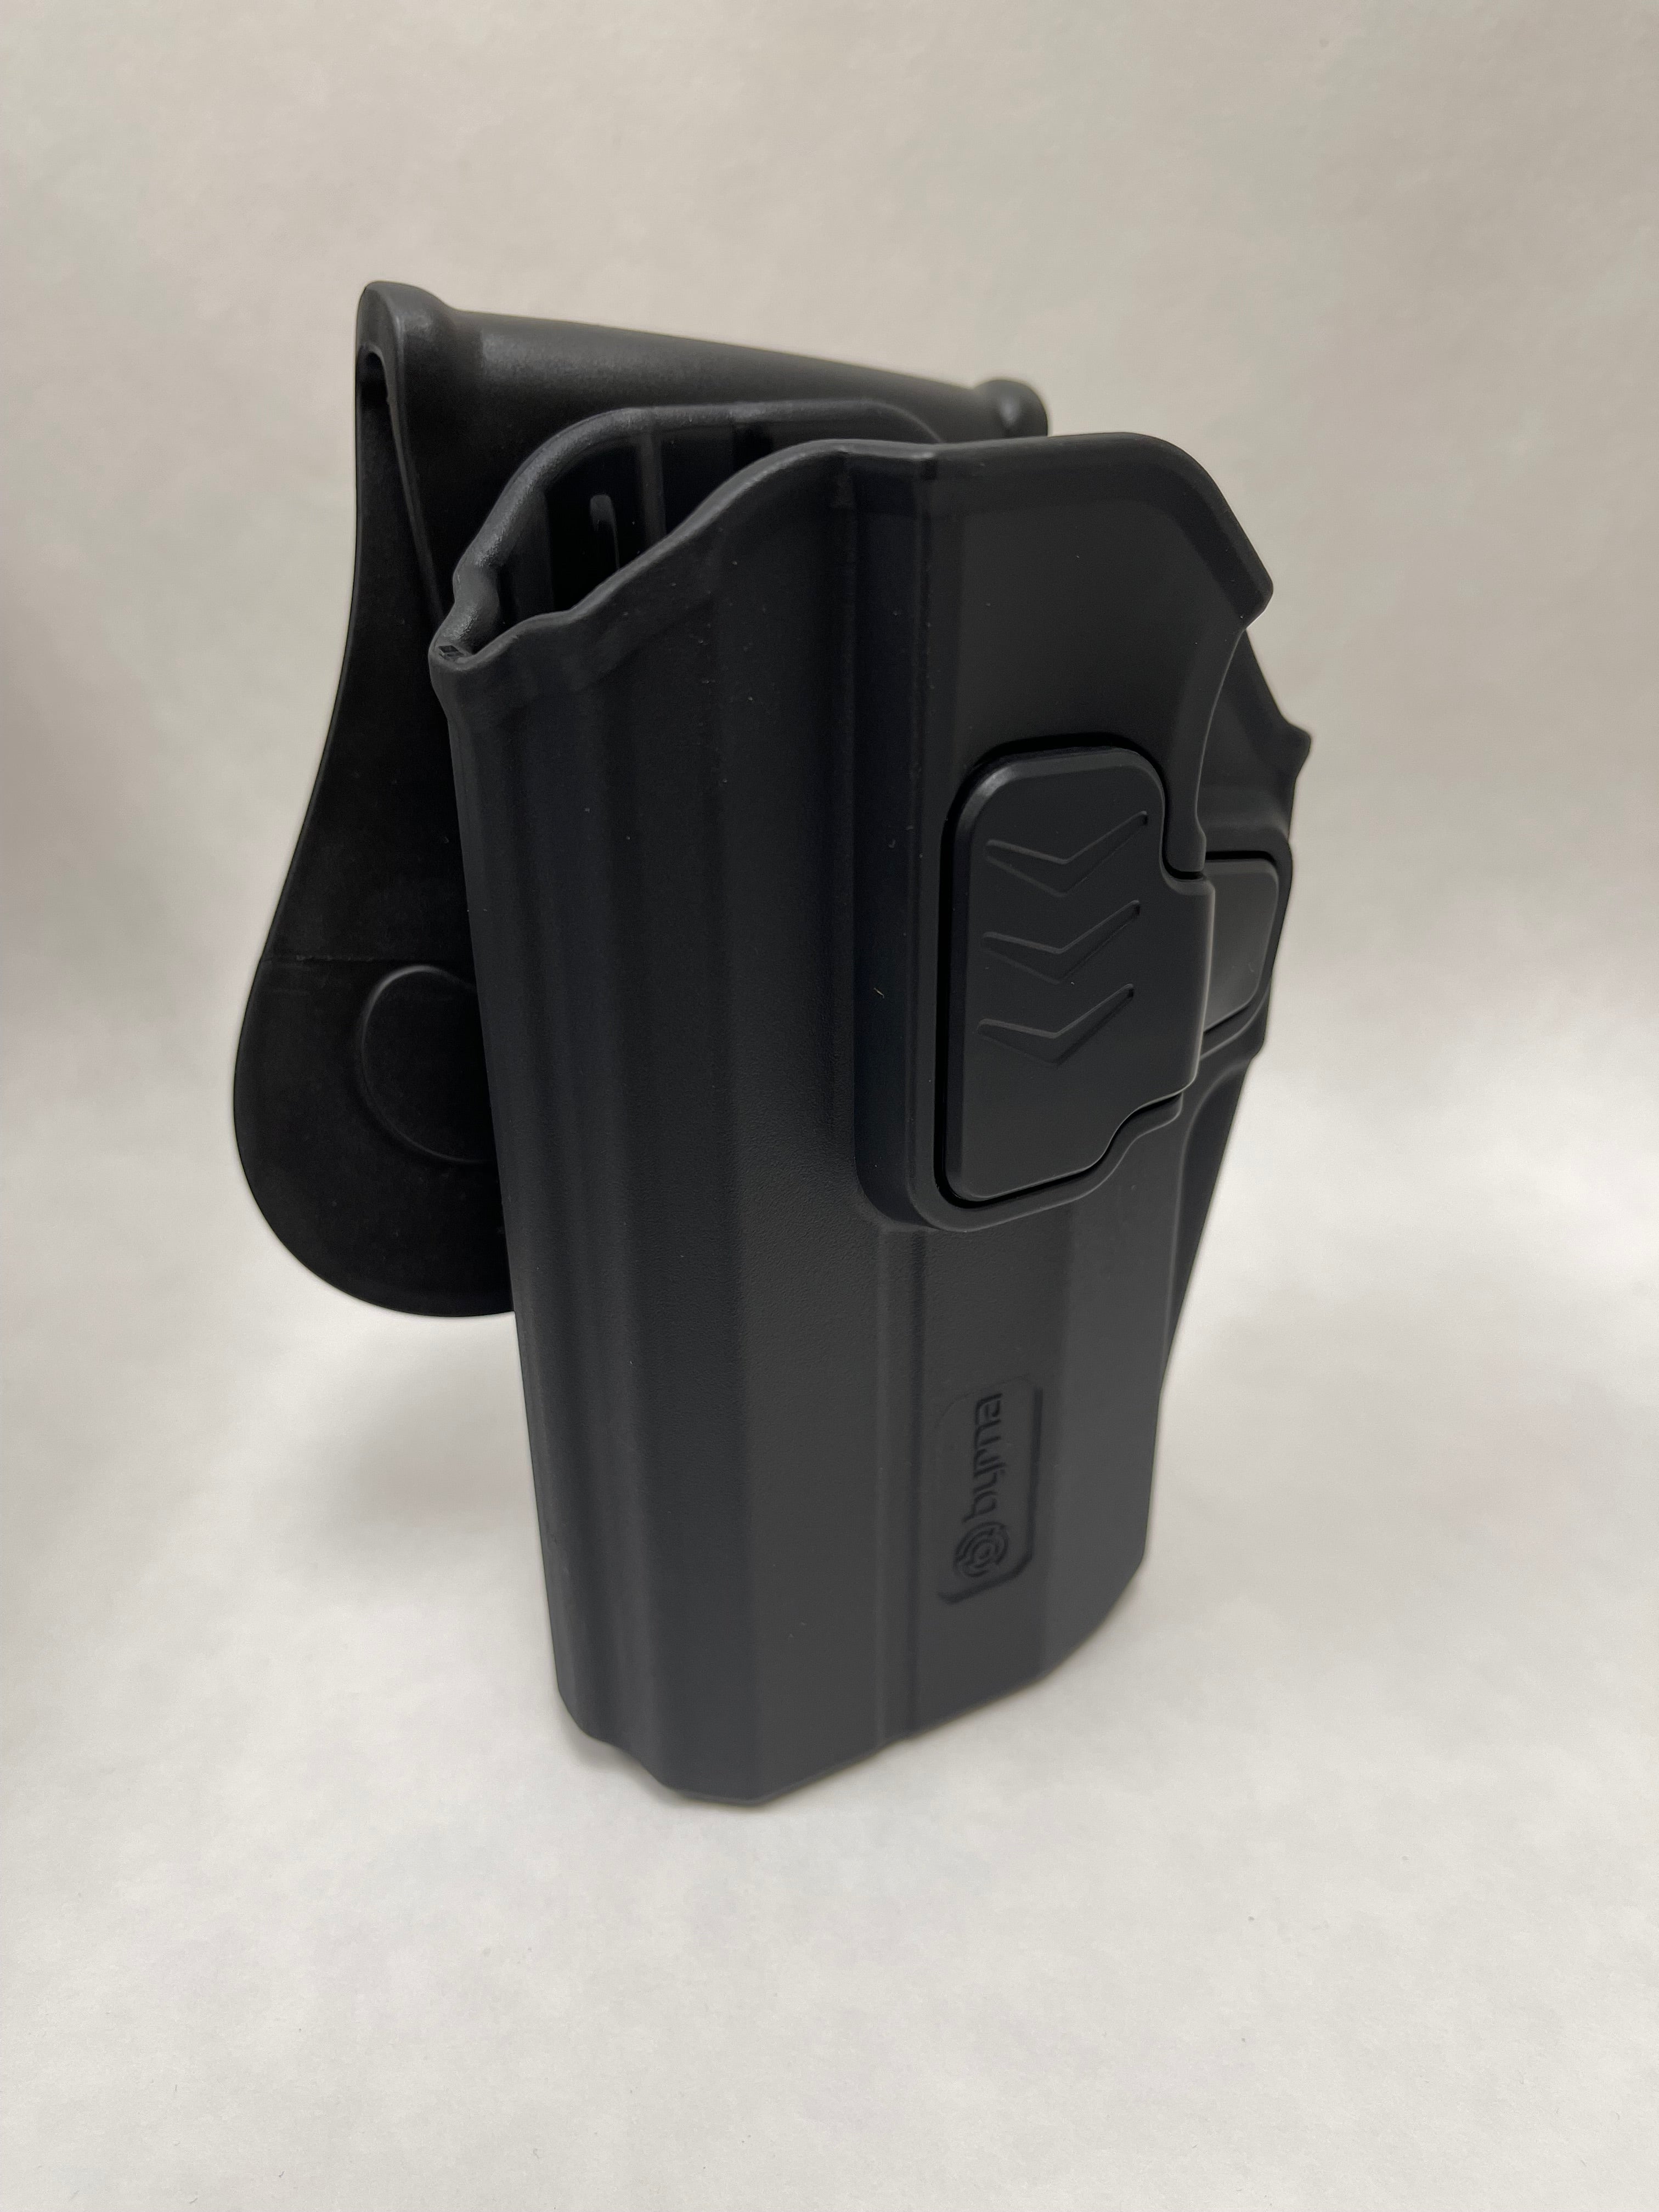 *NEW* Byrna LEFT HAND GEN 2 Level 2 Adjustable Holster w/Paddle Attachment